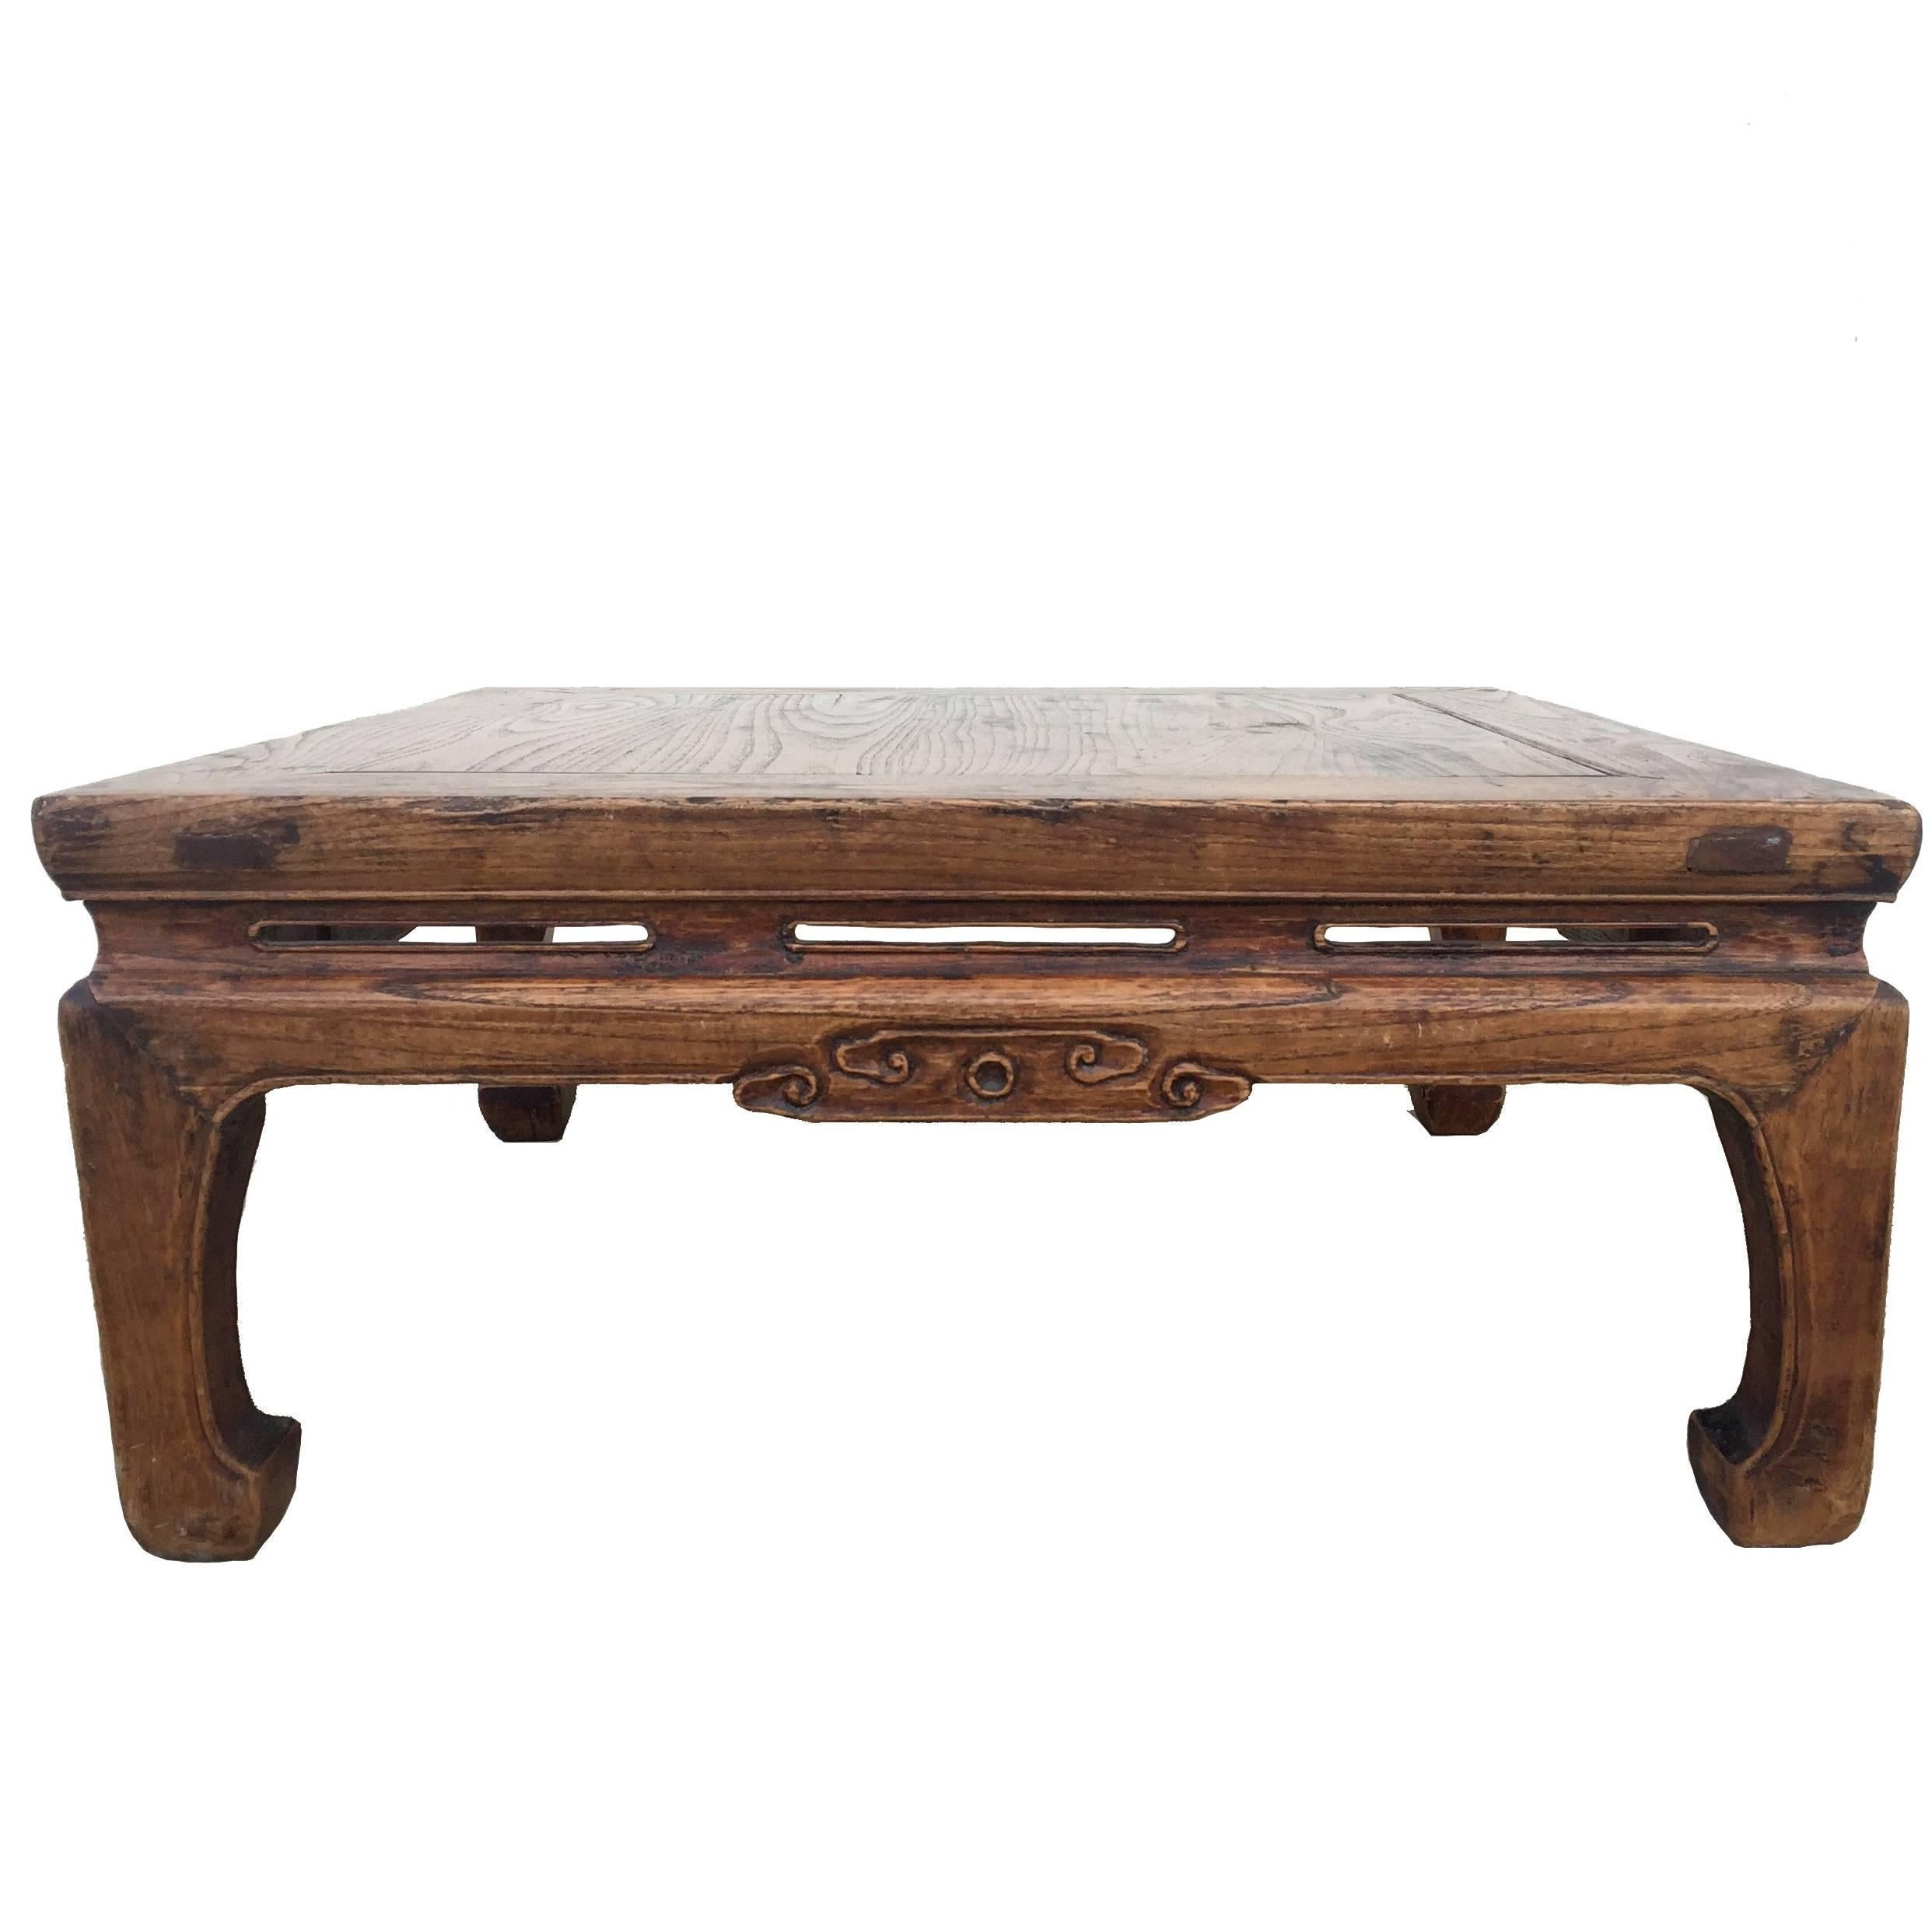 Antique Chinese Low Table